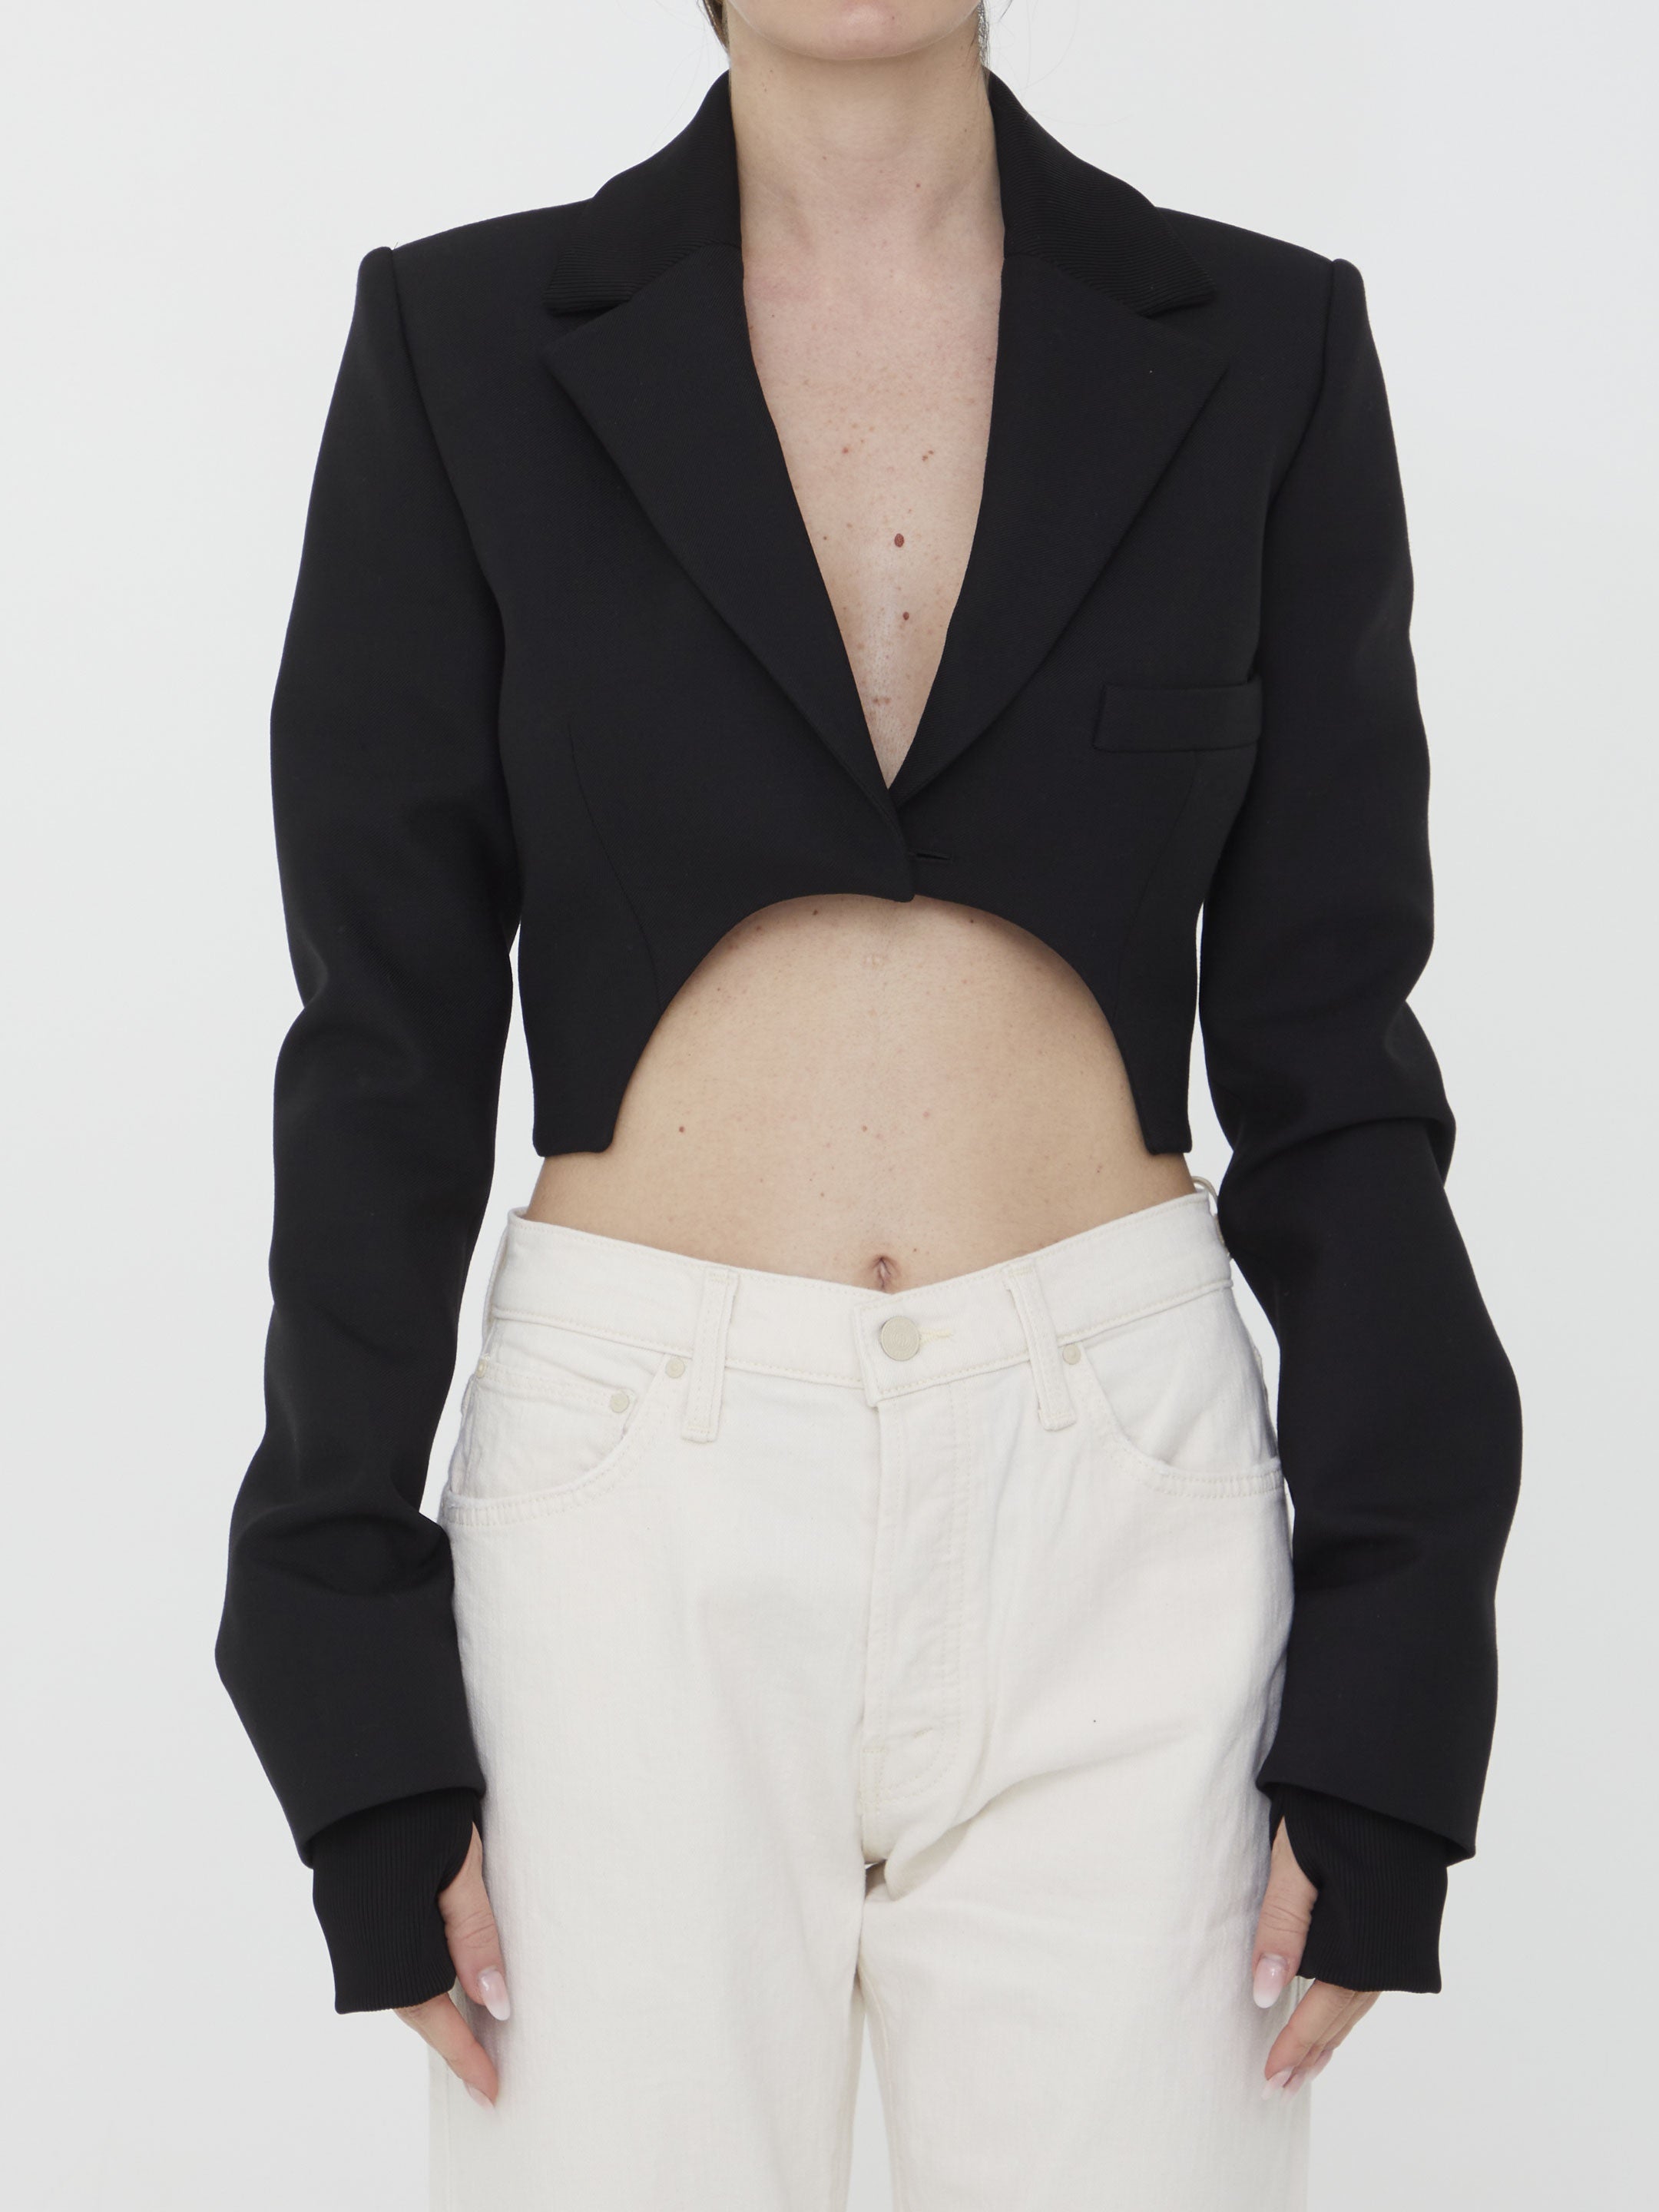 OFF-WHITE-OUTLET-SALE-Asymmetrical-cropped-jacket-Jacken-Mantel-40-BLACK-ARCHIVE-COLLECTION.jpg